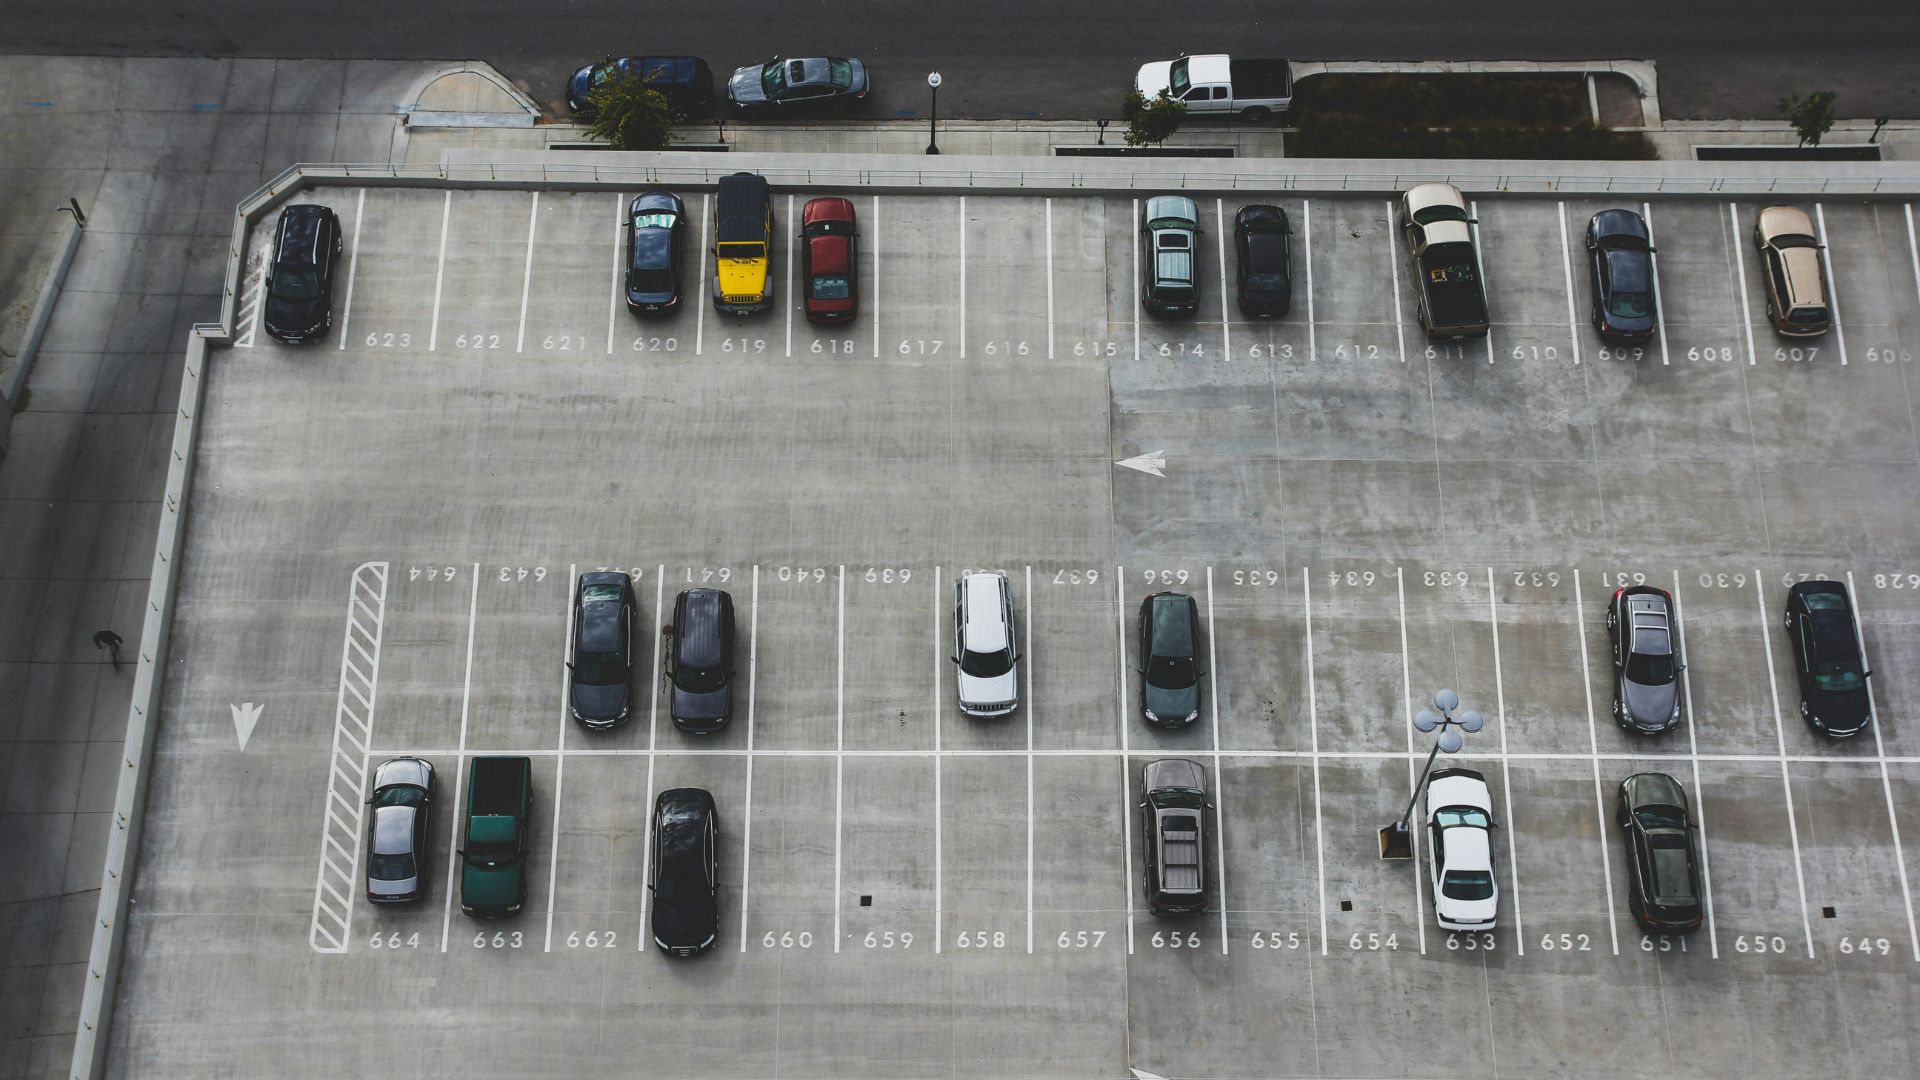 <p>The program doesn’t allow locals to keep their cars parked in this lot all day. During the day, the lot must be vacated. Therefore, it can only be used at night.    </p> <p>However, the lot will also have certain amenities to help those who sleep in the area, as it will have portable restrooms, showers, and trash bins. </p>